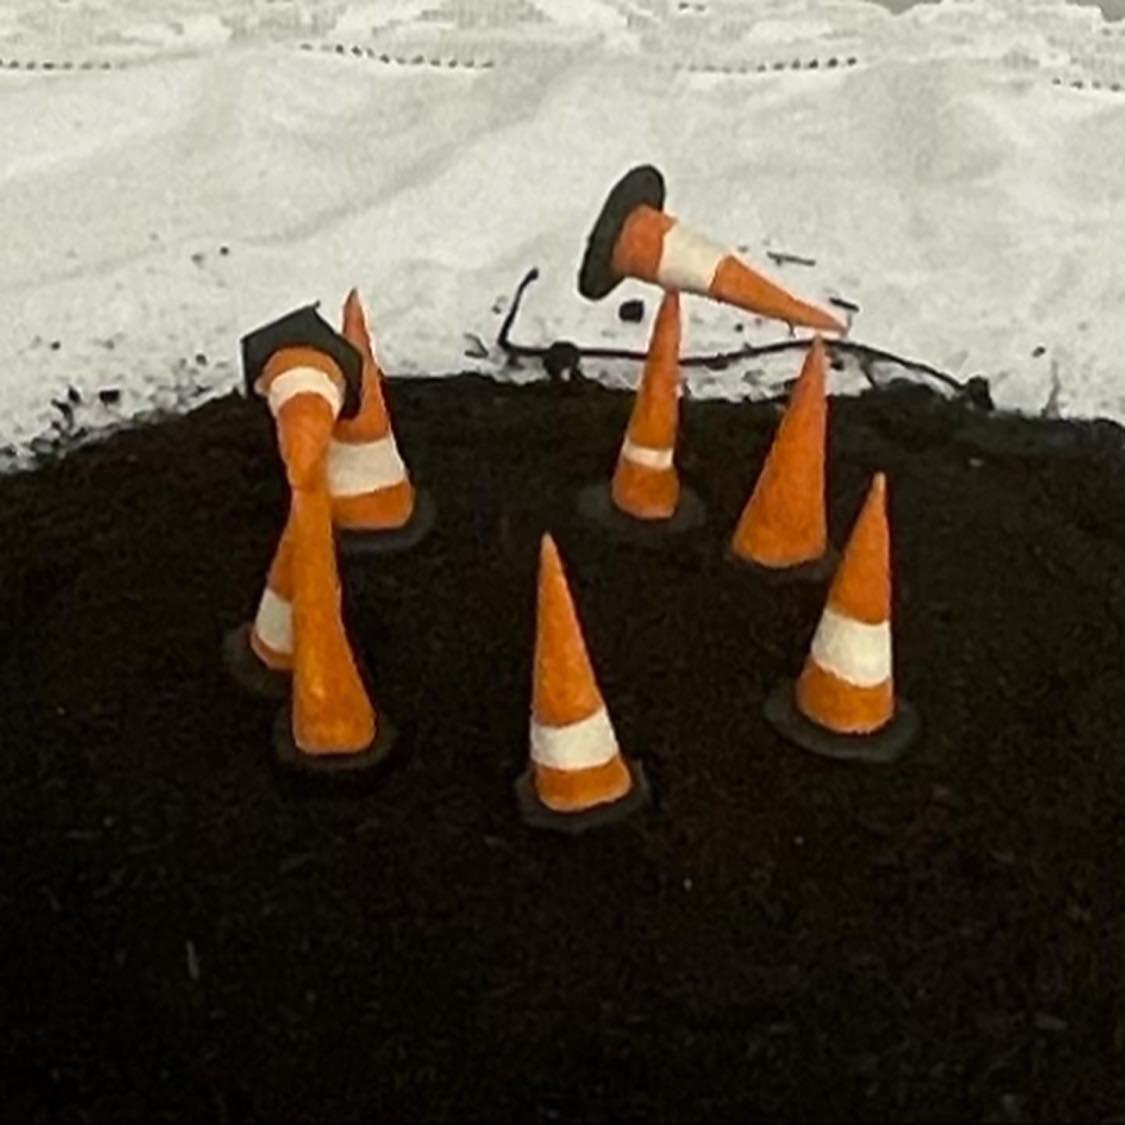 An image of several cones on a mound of dirt.